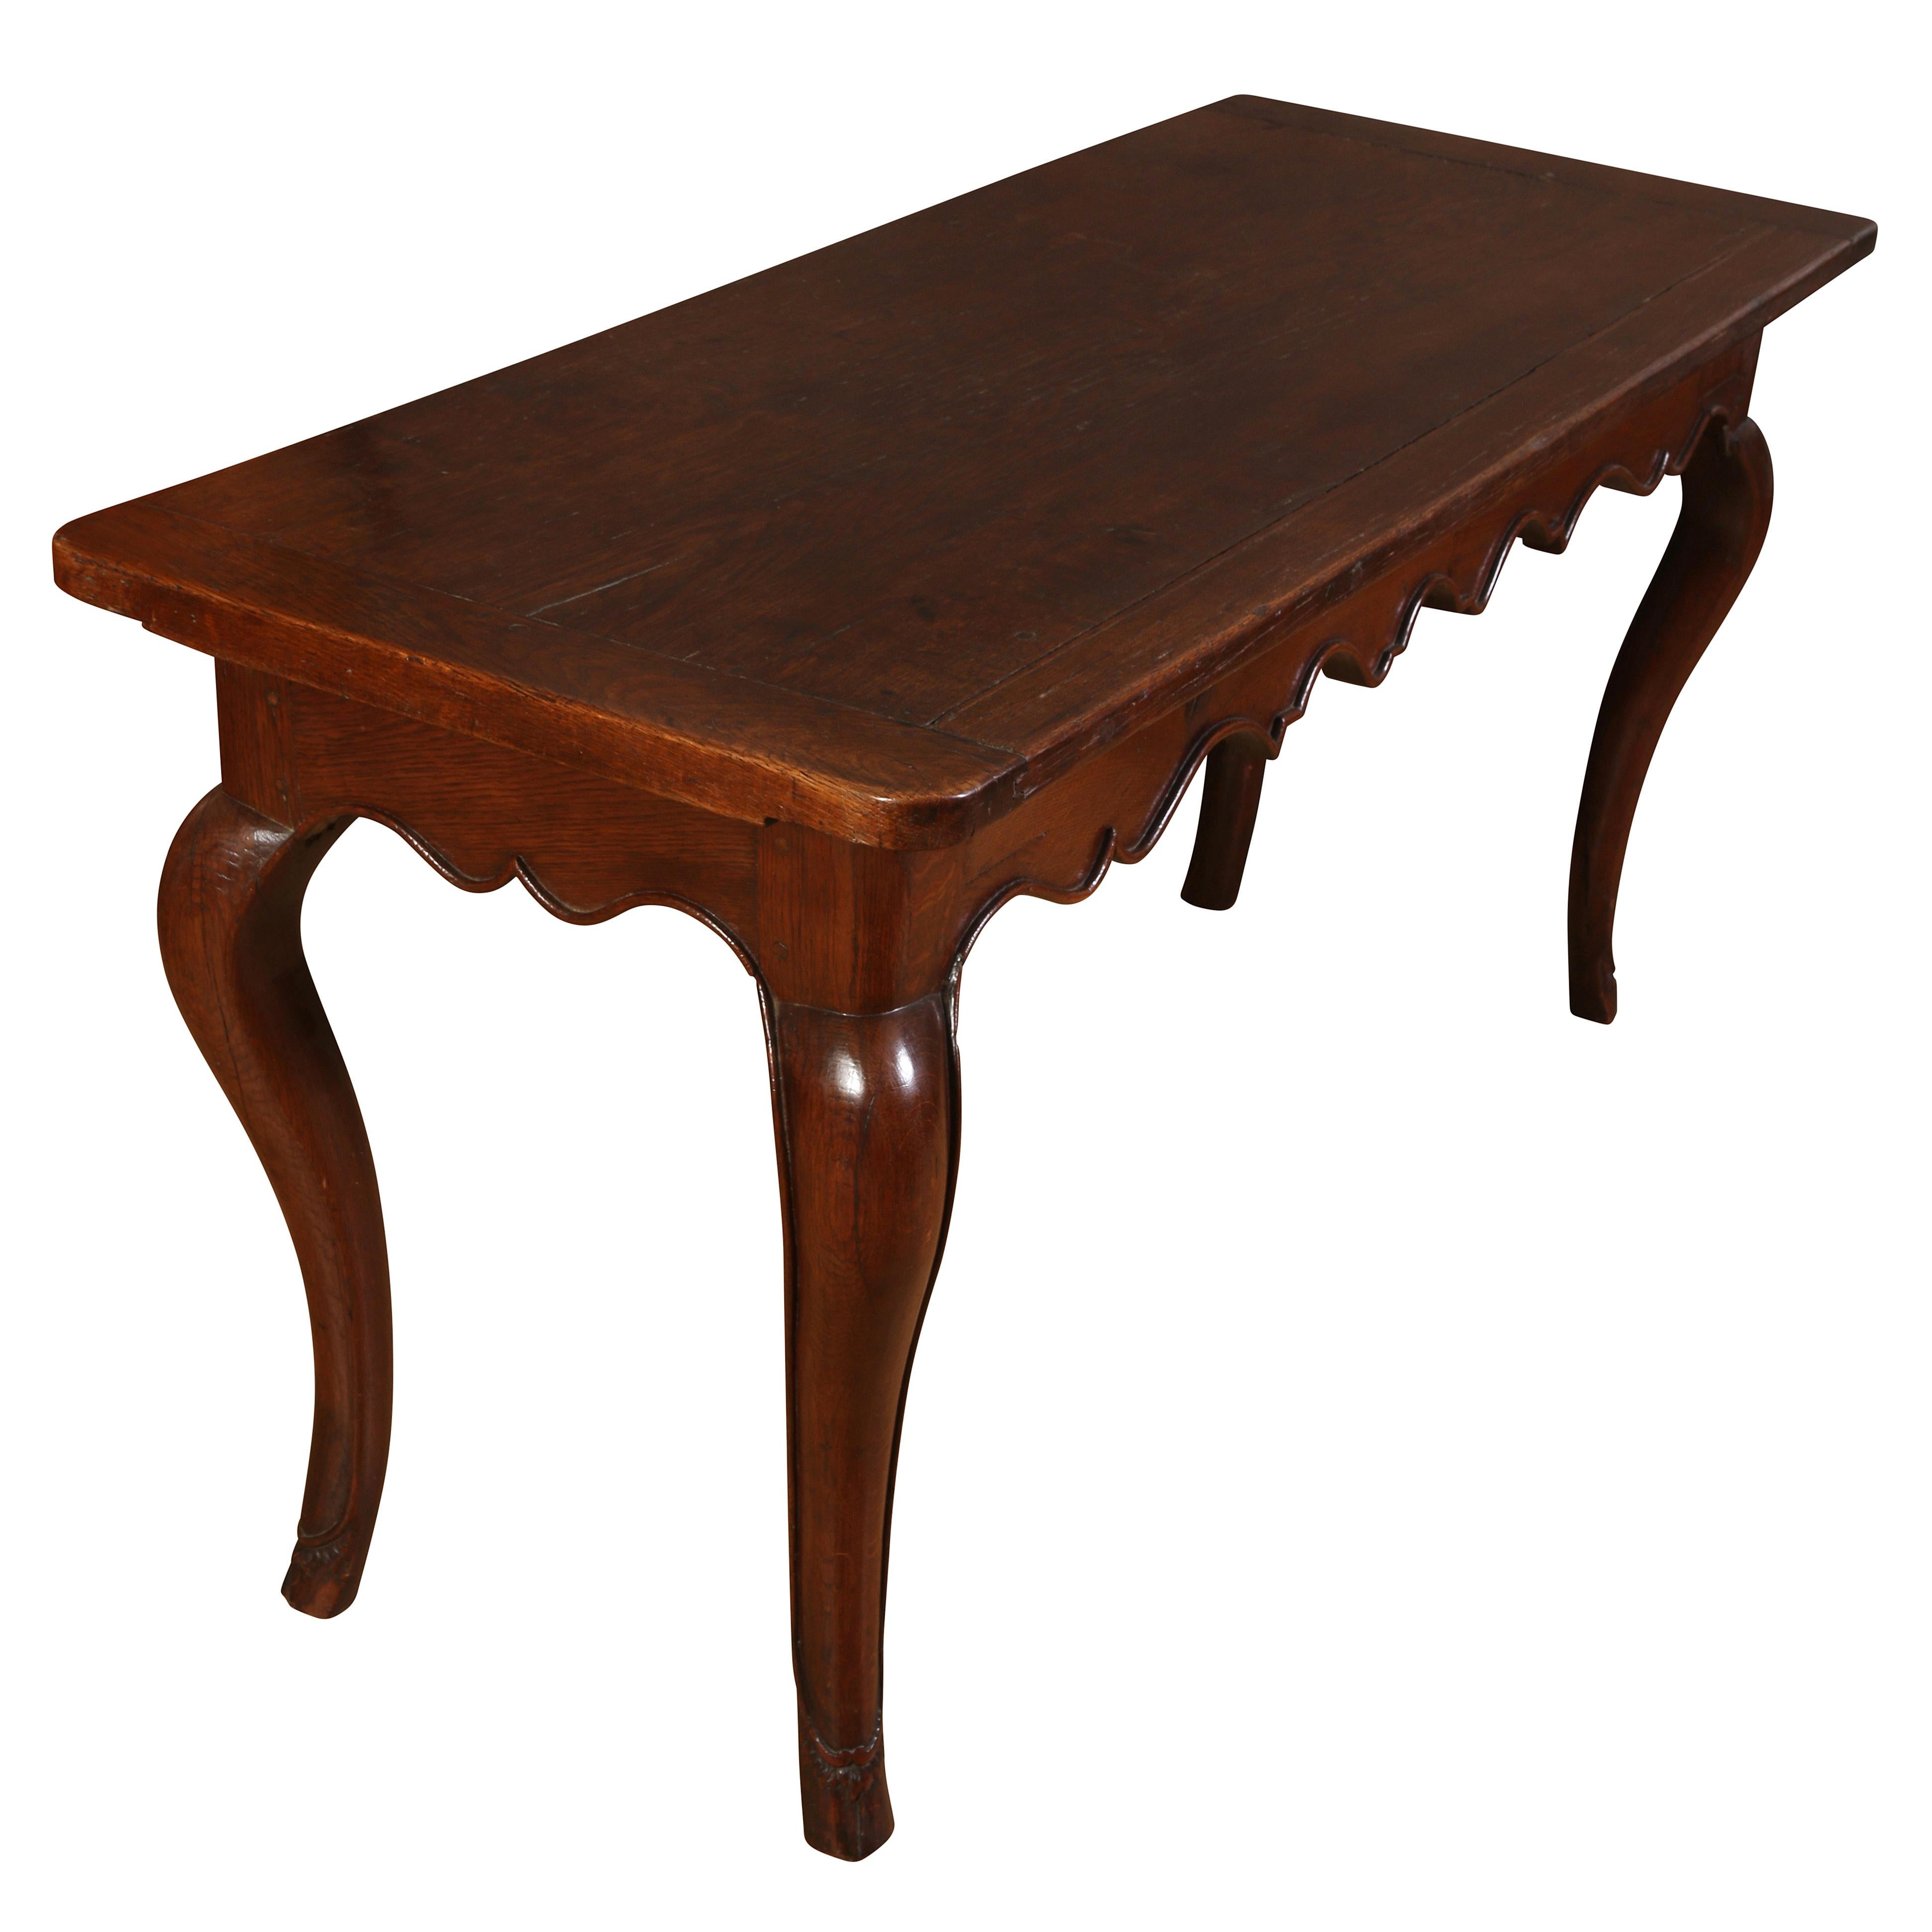 A 19th Century French Provincial Oak Hall Table   In Good Condition For Sale In New York, NY